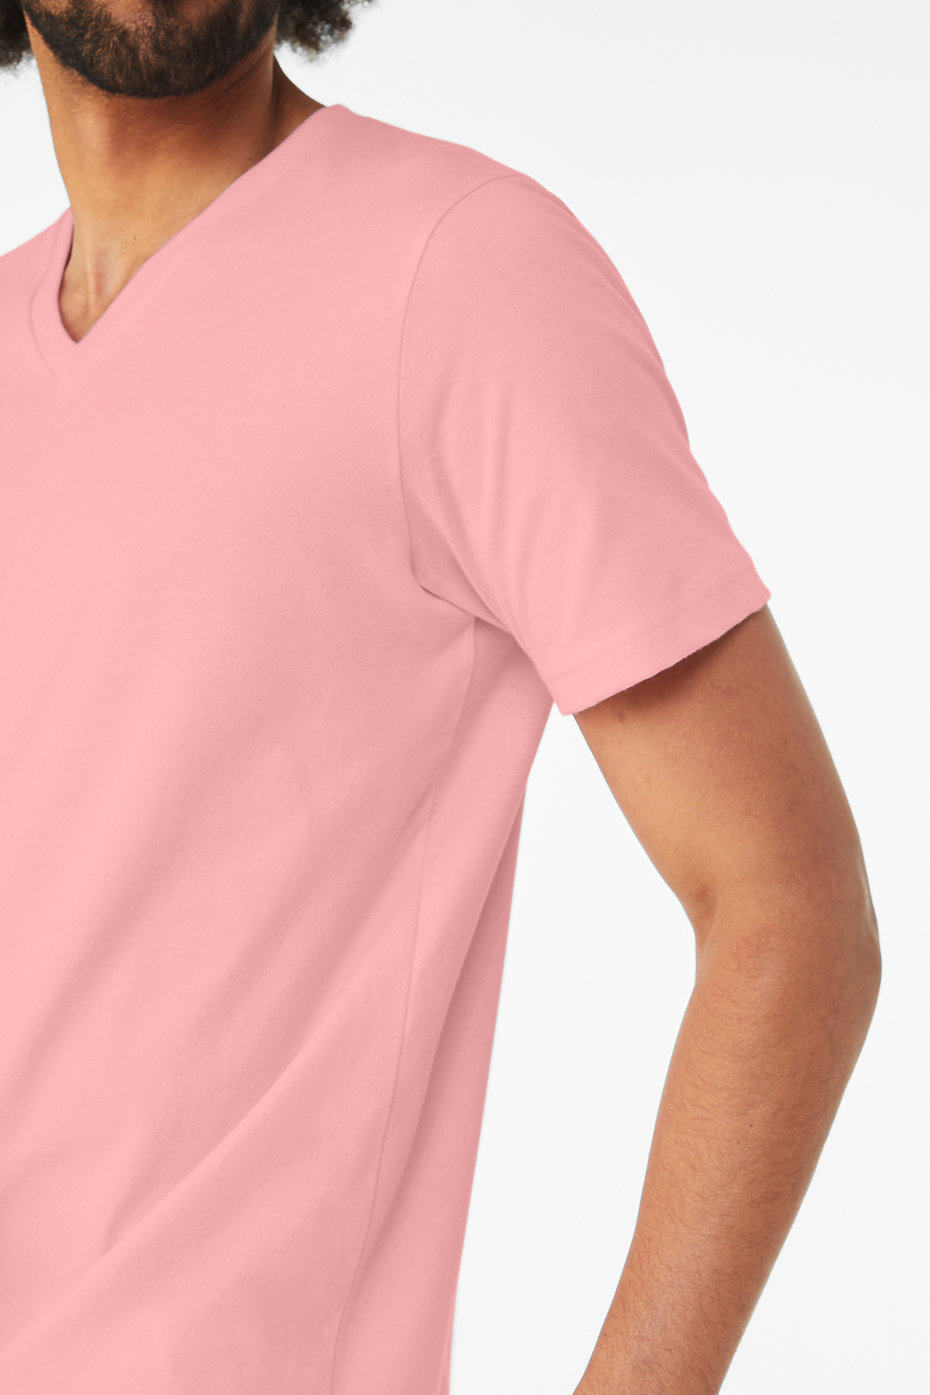 Men's pink blank T-shirt template,from two sides, natural shape on